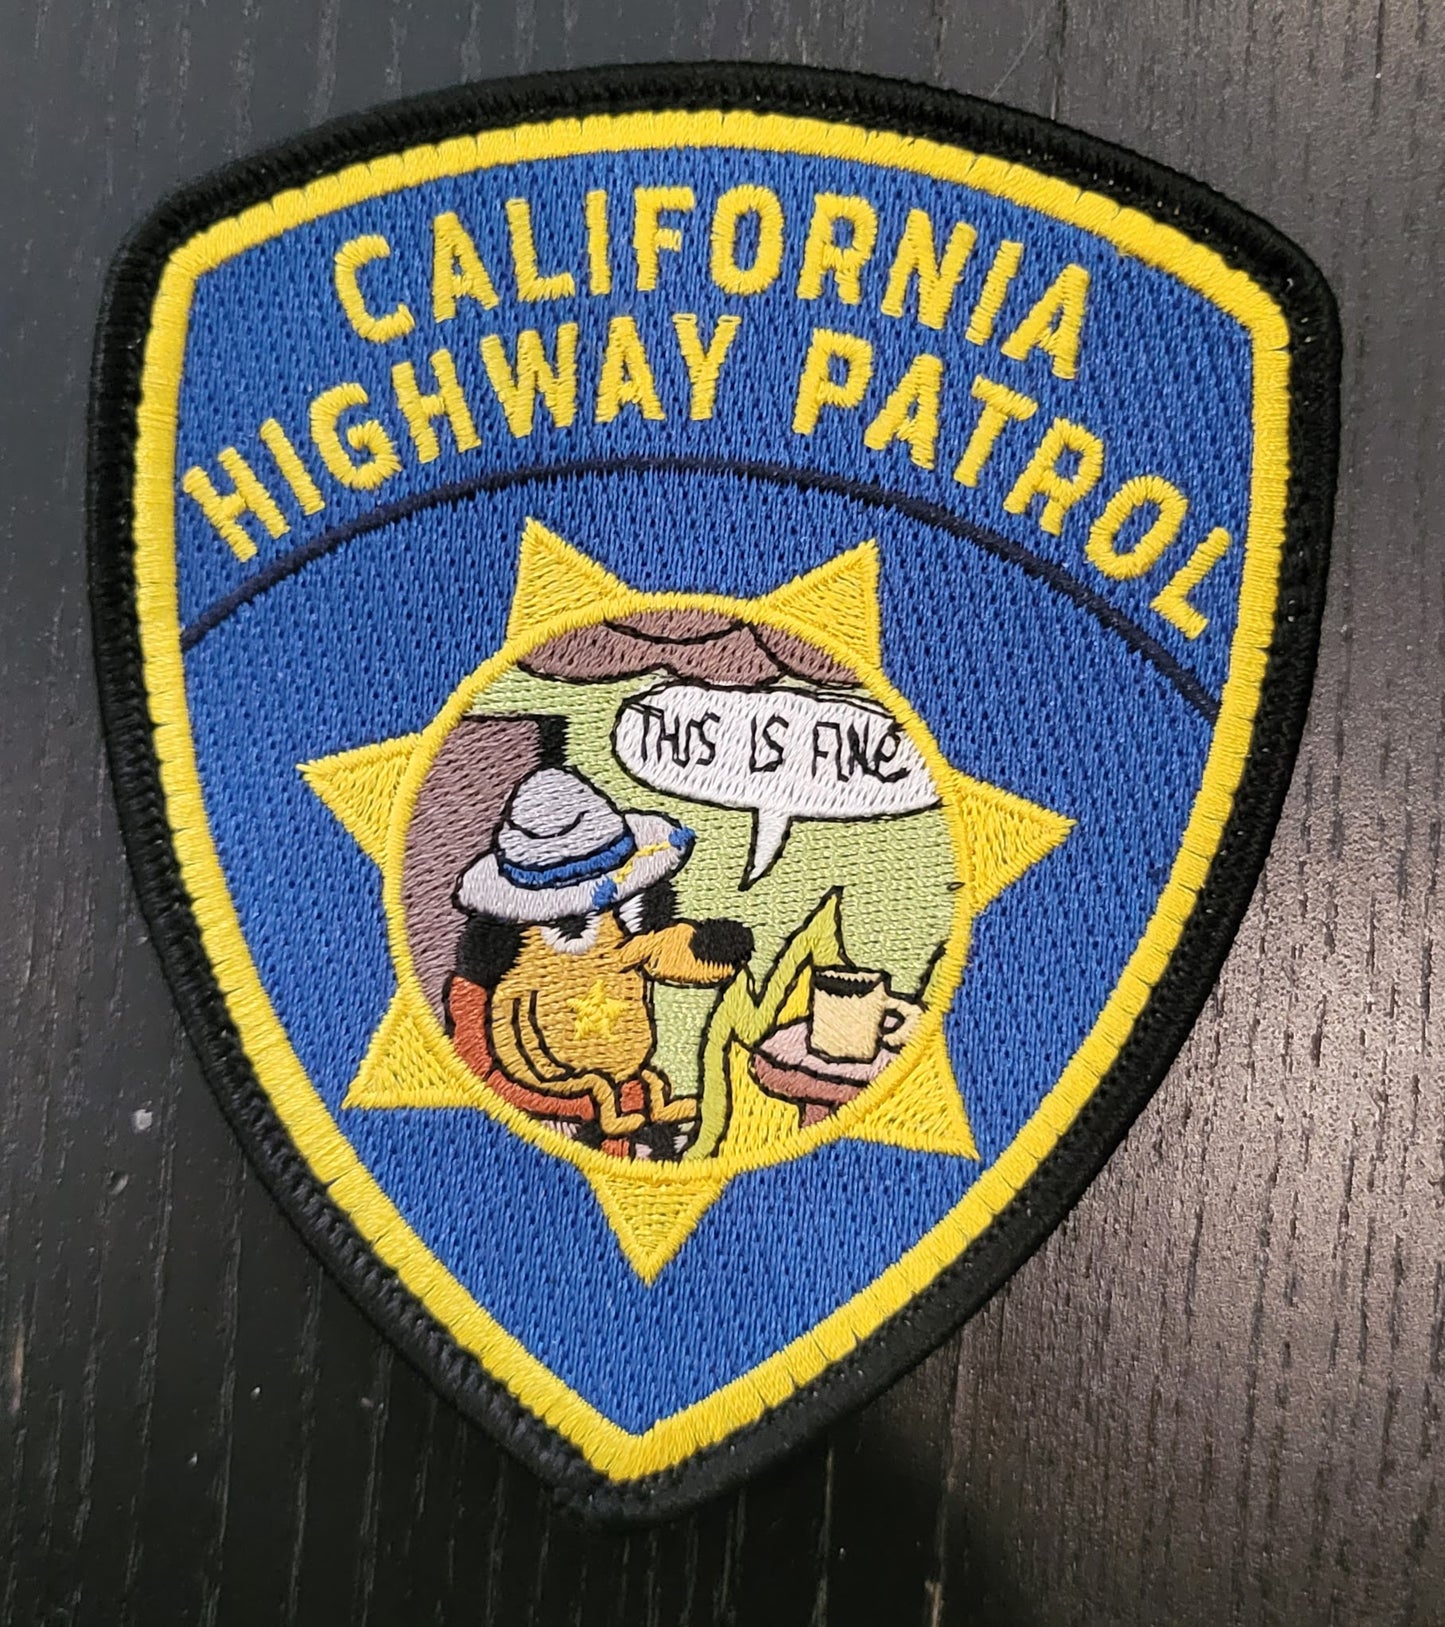 California Highway Patrol Inspired "This is Fine" Patch